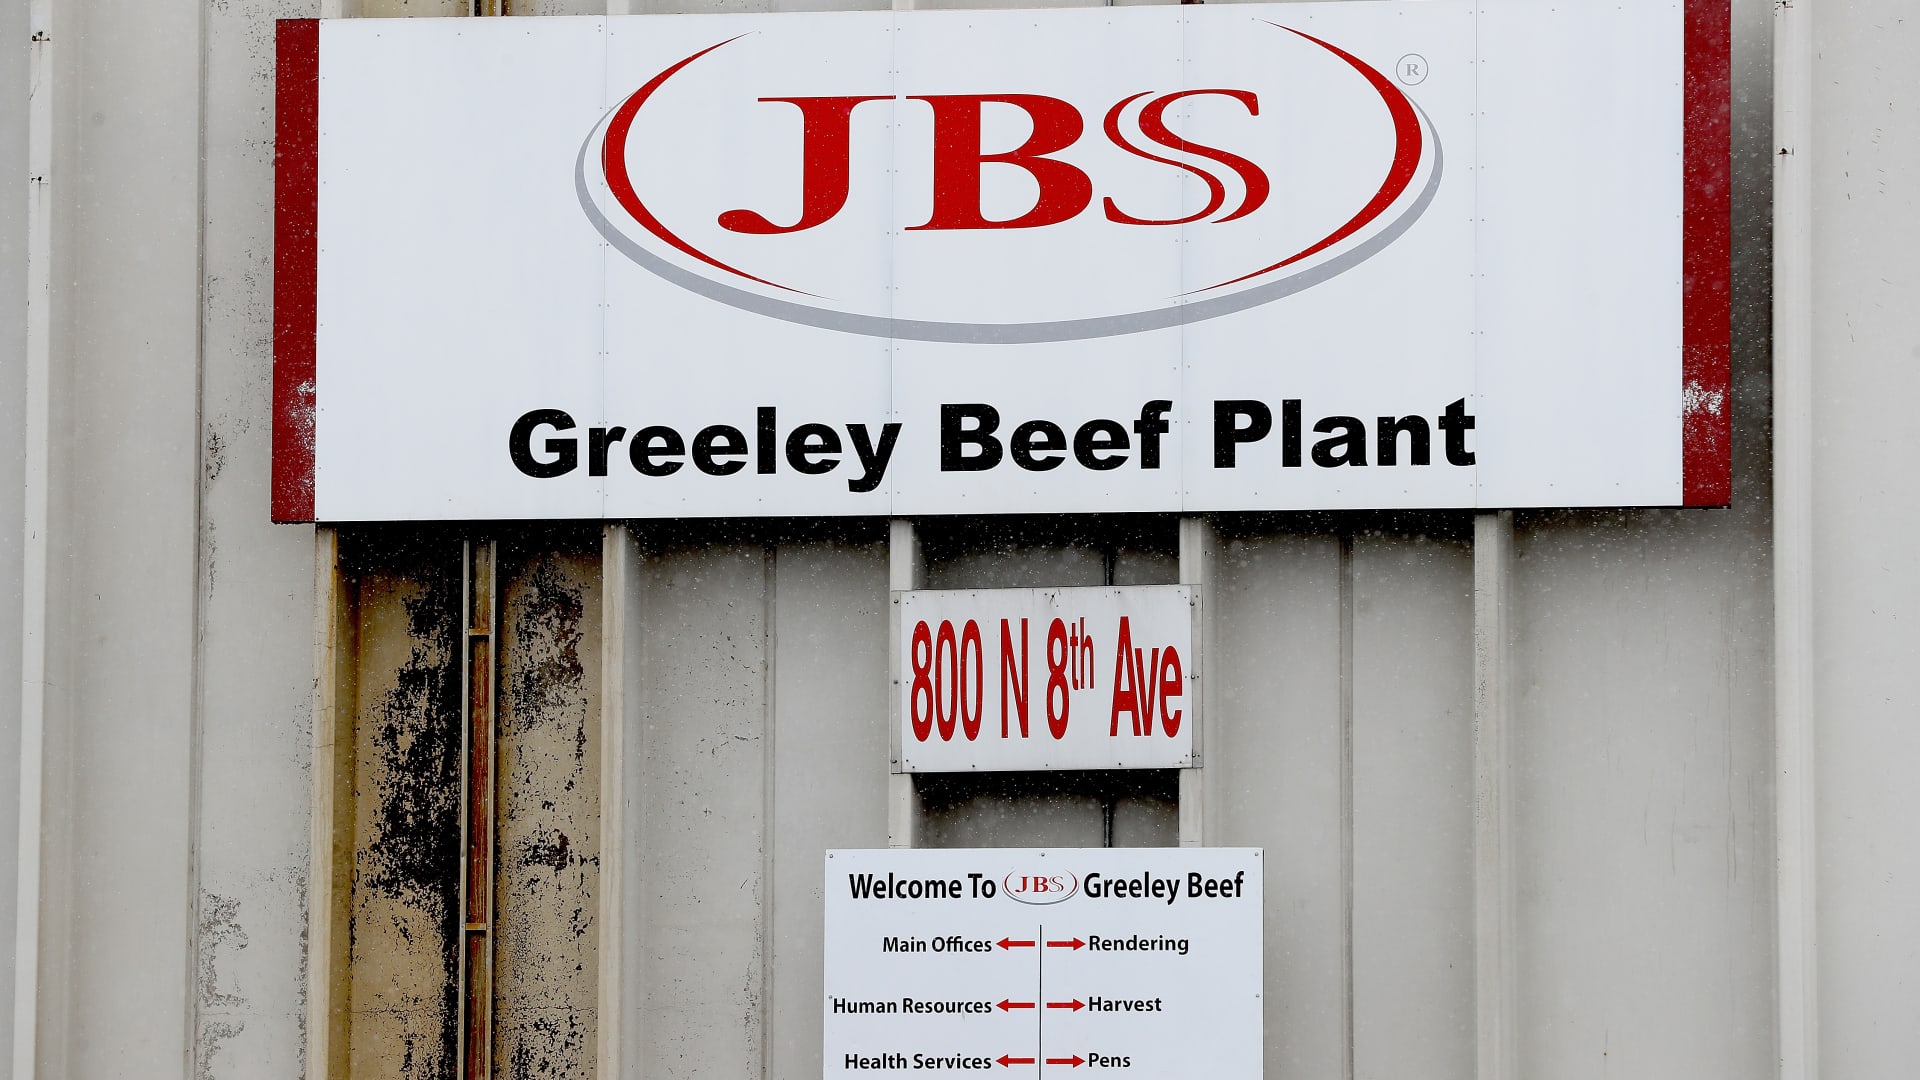 Ready go to ... https://www.cnbc.com/2021/06/01/big-north-american-meat-plants-halt-operations-after-jbs-cyberattack.html [ U.S. says ransomware attack on meatpacker JBS likely from Russia; cattle slaughter resuming ]